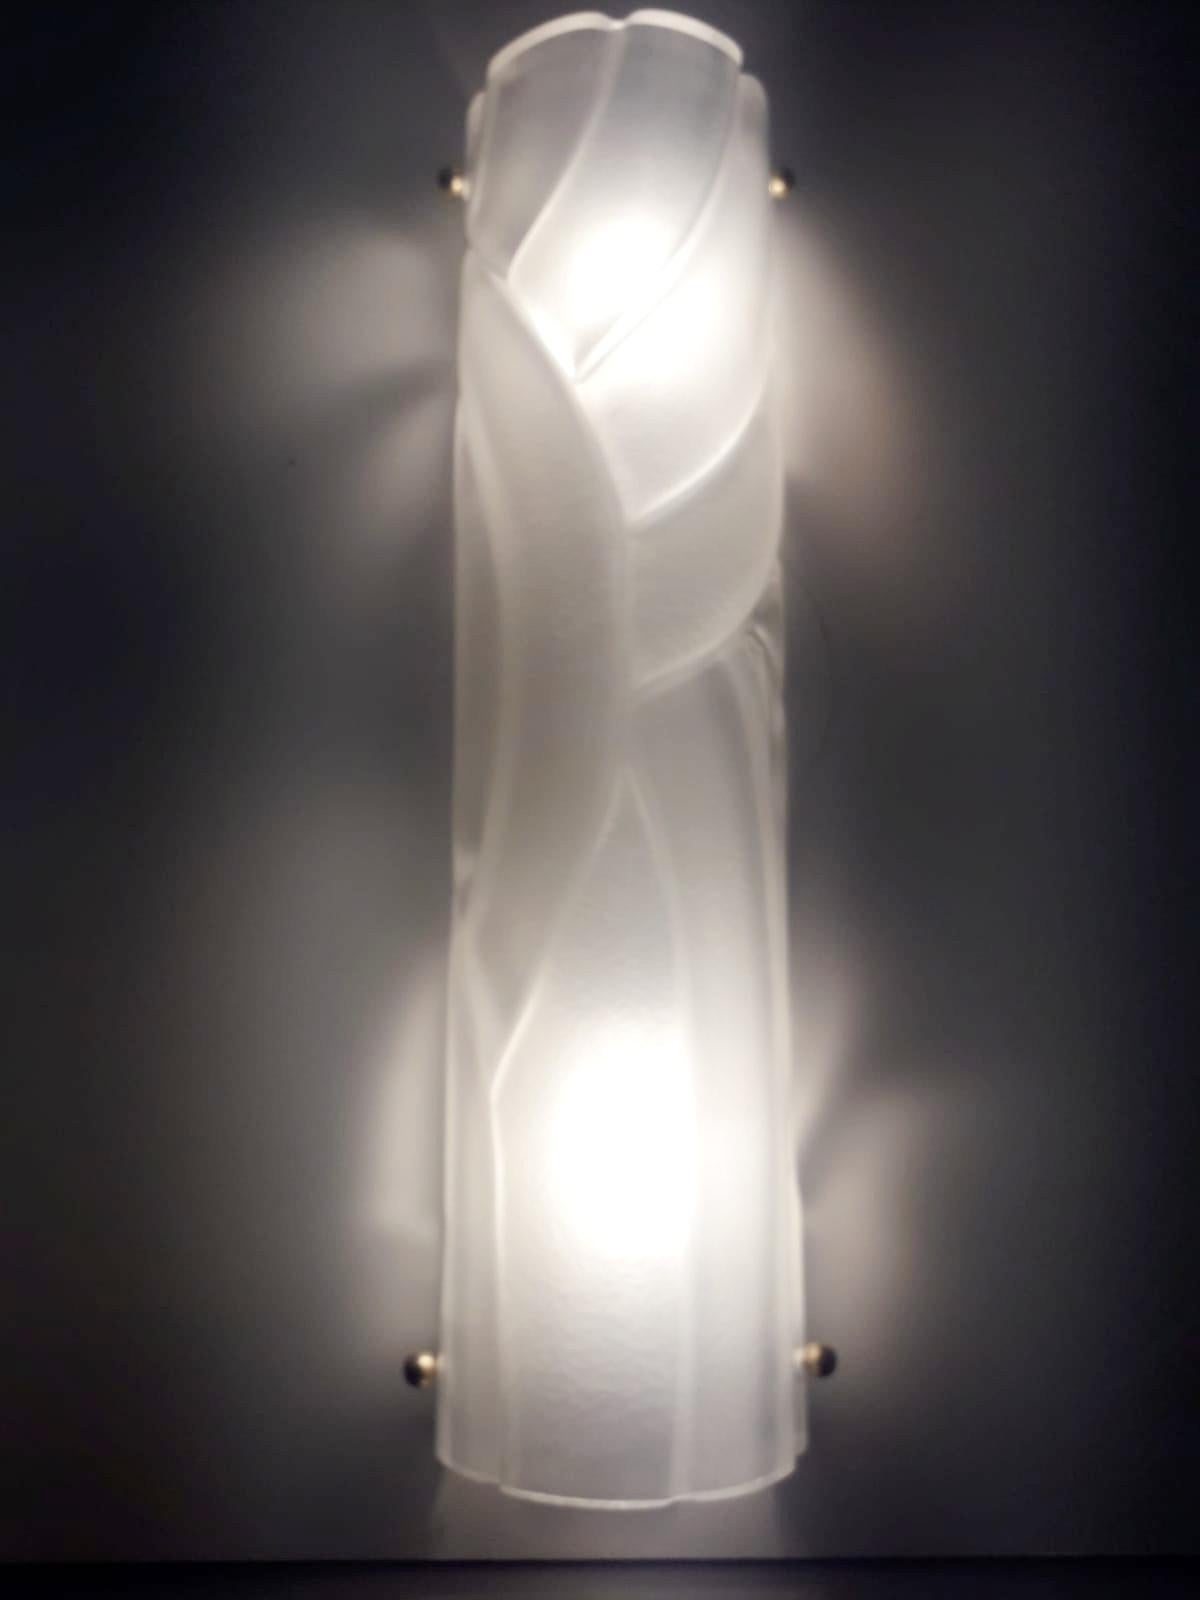 Italian Art Deco style wall light or flush mount shown in frosted Murano glass hand blown to create a stylish wrapped design pattern, mounted on white metal frame / Designed by Fabio Bergomi for Fabio Ltd / Made in Italy
2 lights / E12 or E14 type /